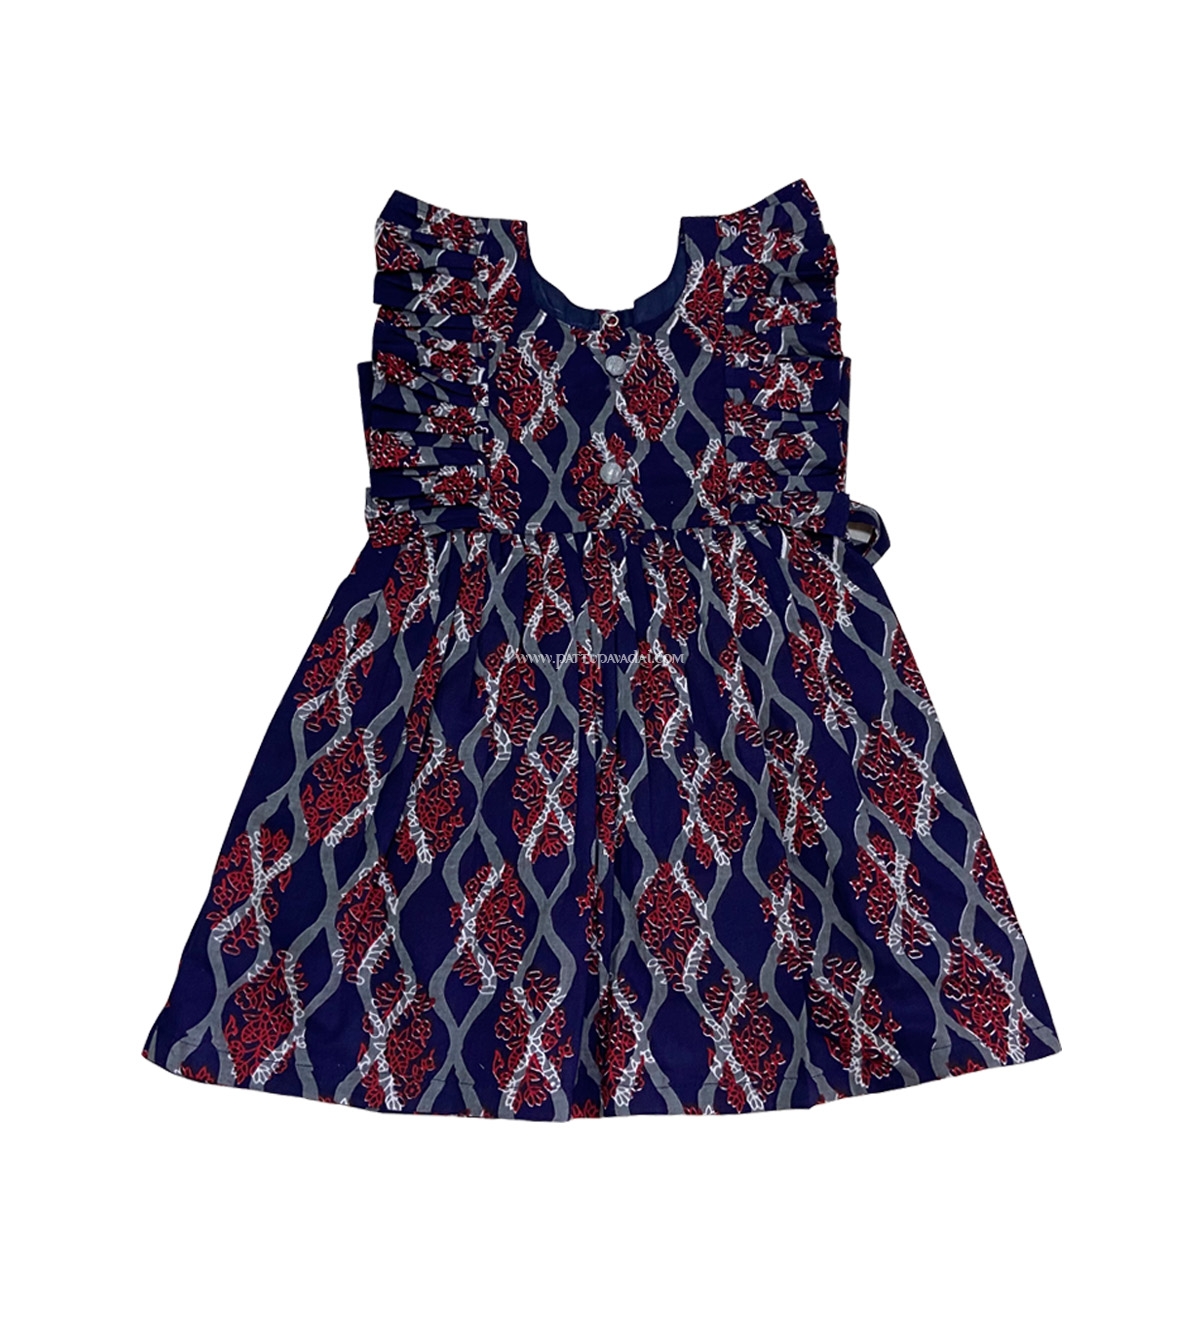 Grey and Navy Blue Frock